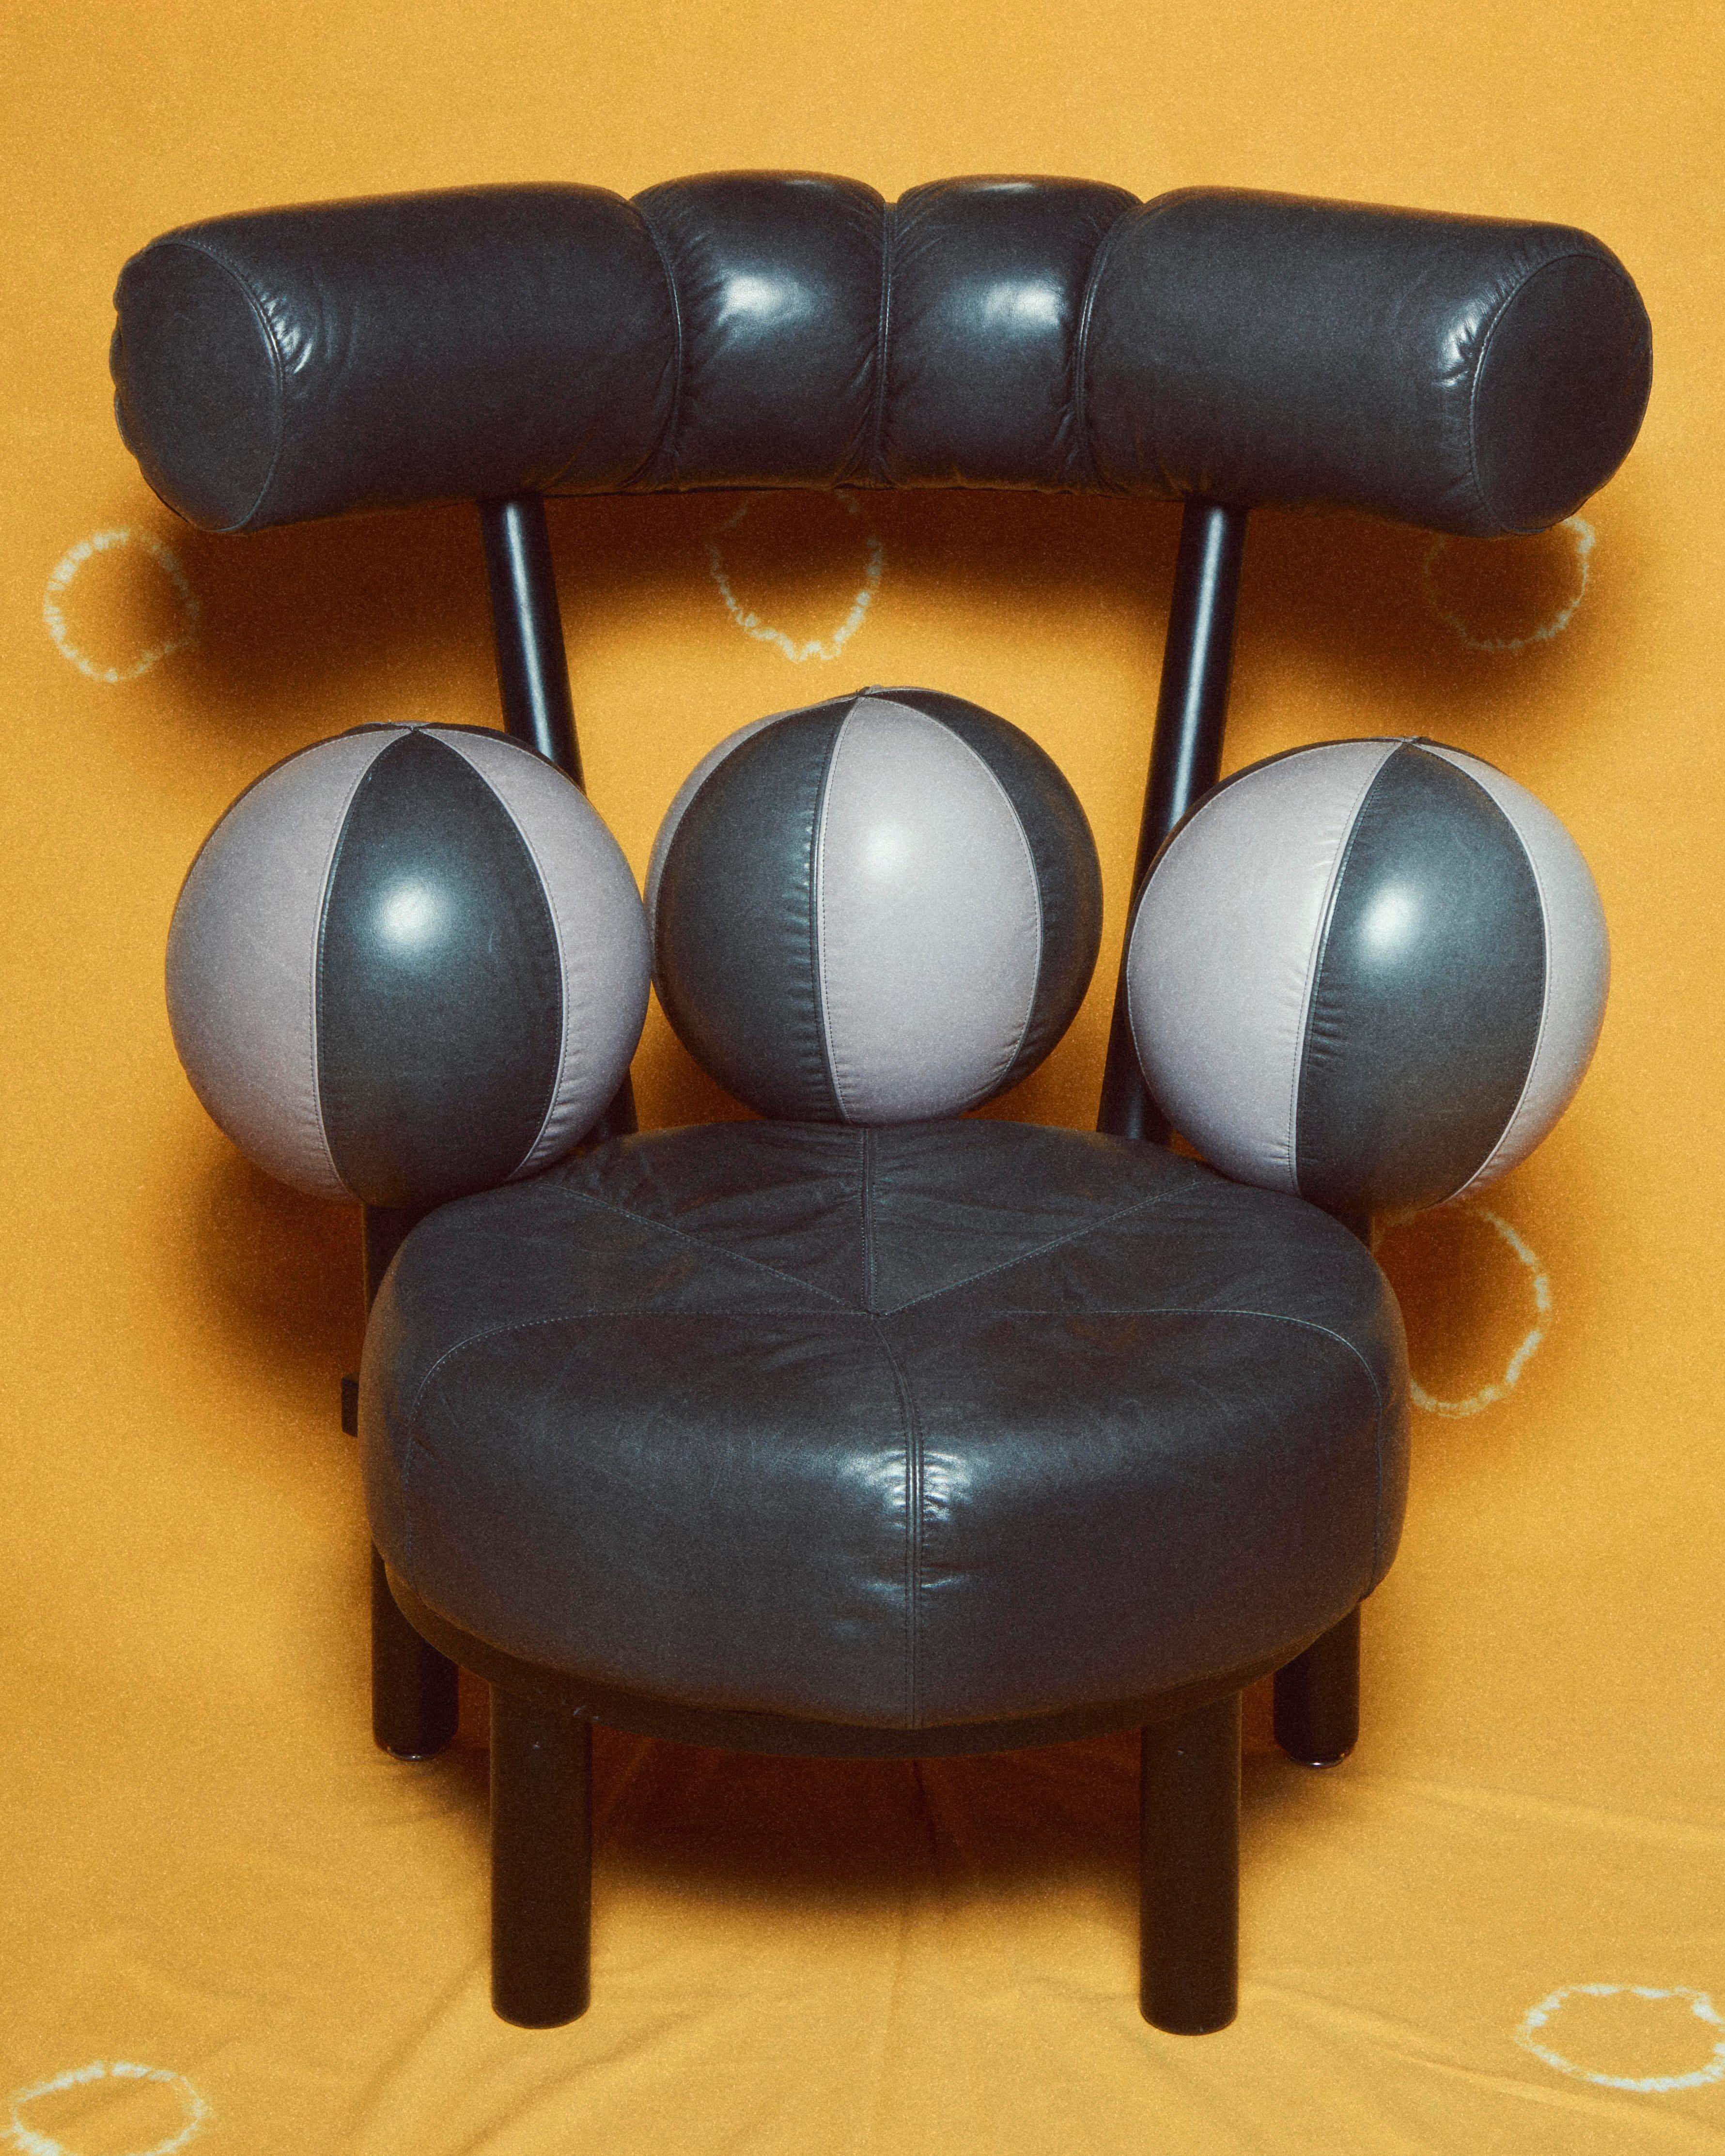 Amazing post modern pair of Globe lounge chairs by Peter Opsvik for Stokke Mobler, Norway, circa 1980

Can be sold with a matching 3-seat sofa